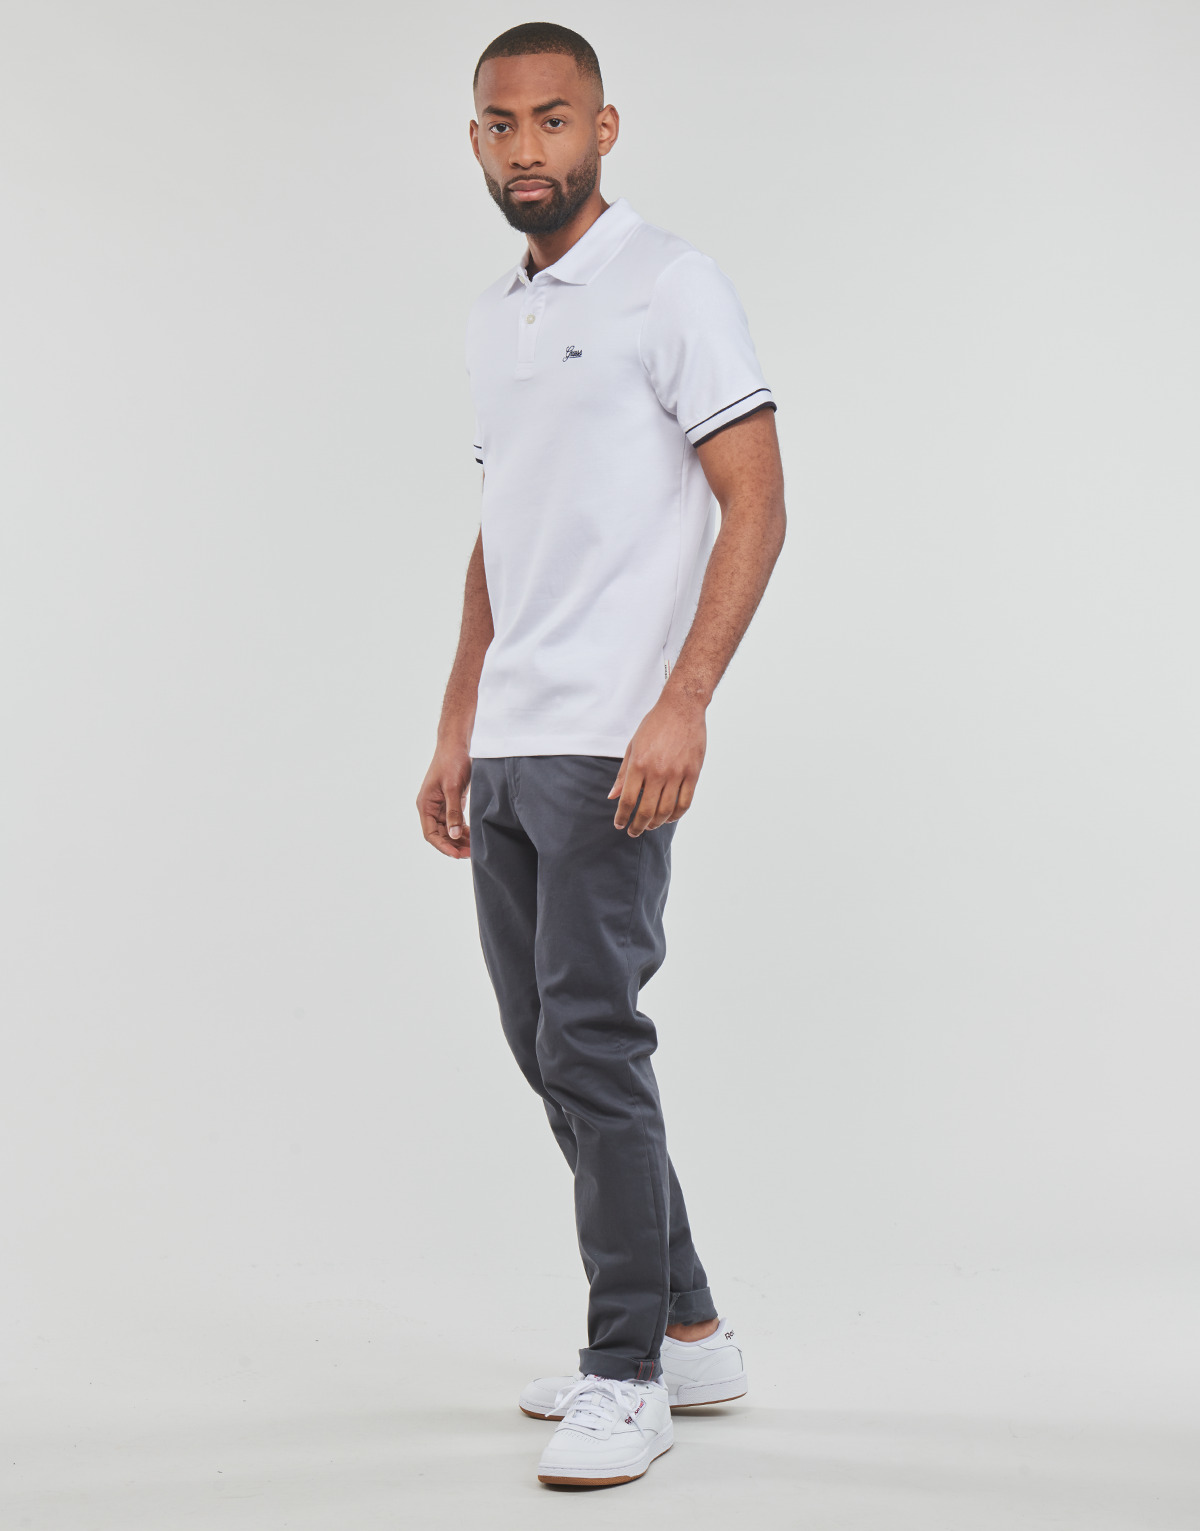 Guess Blanc OLIVER SS POLO btG6Xycf